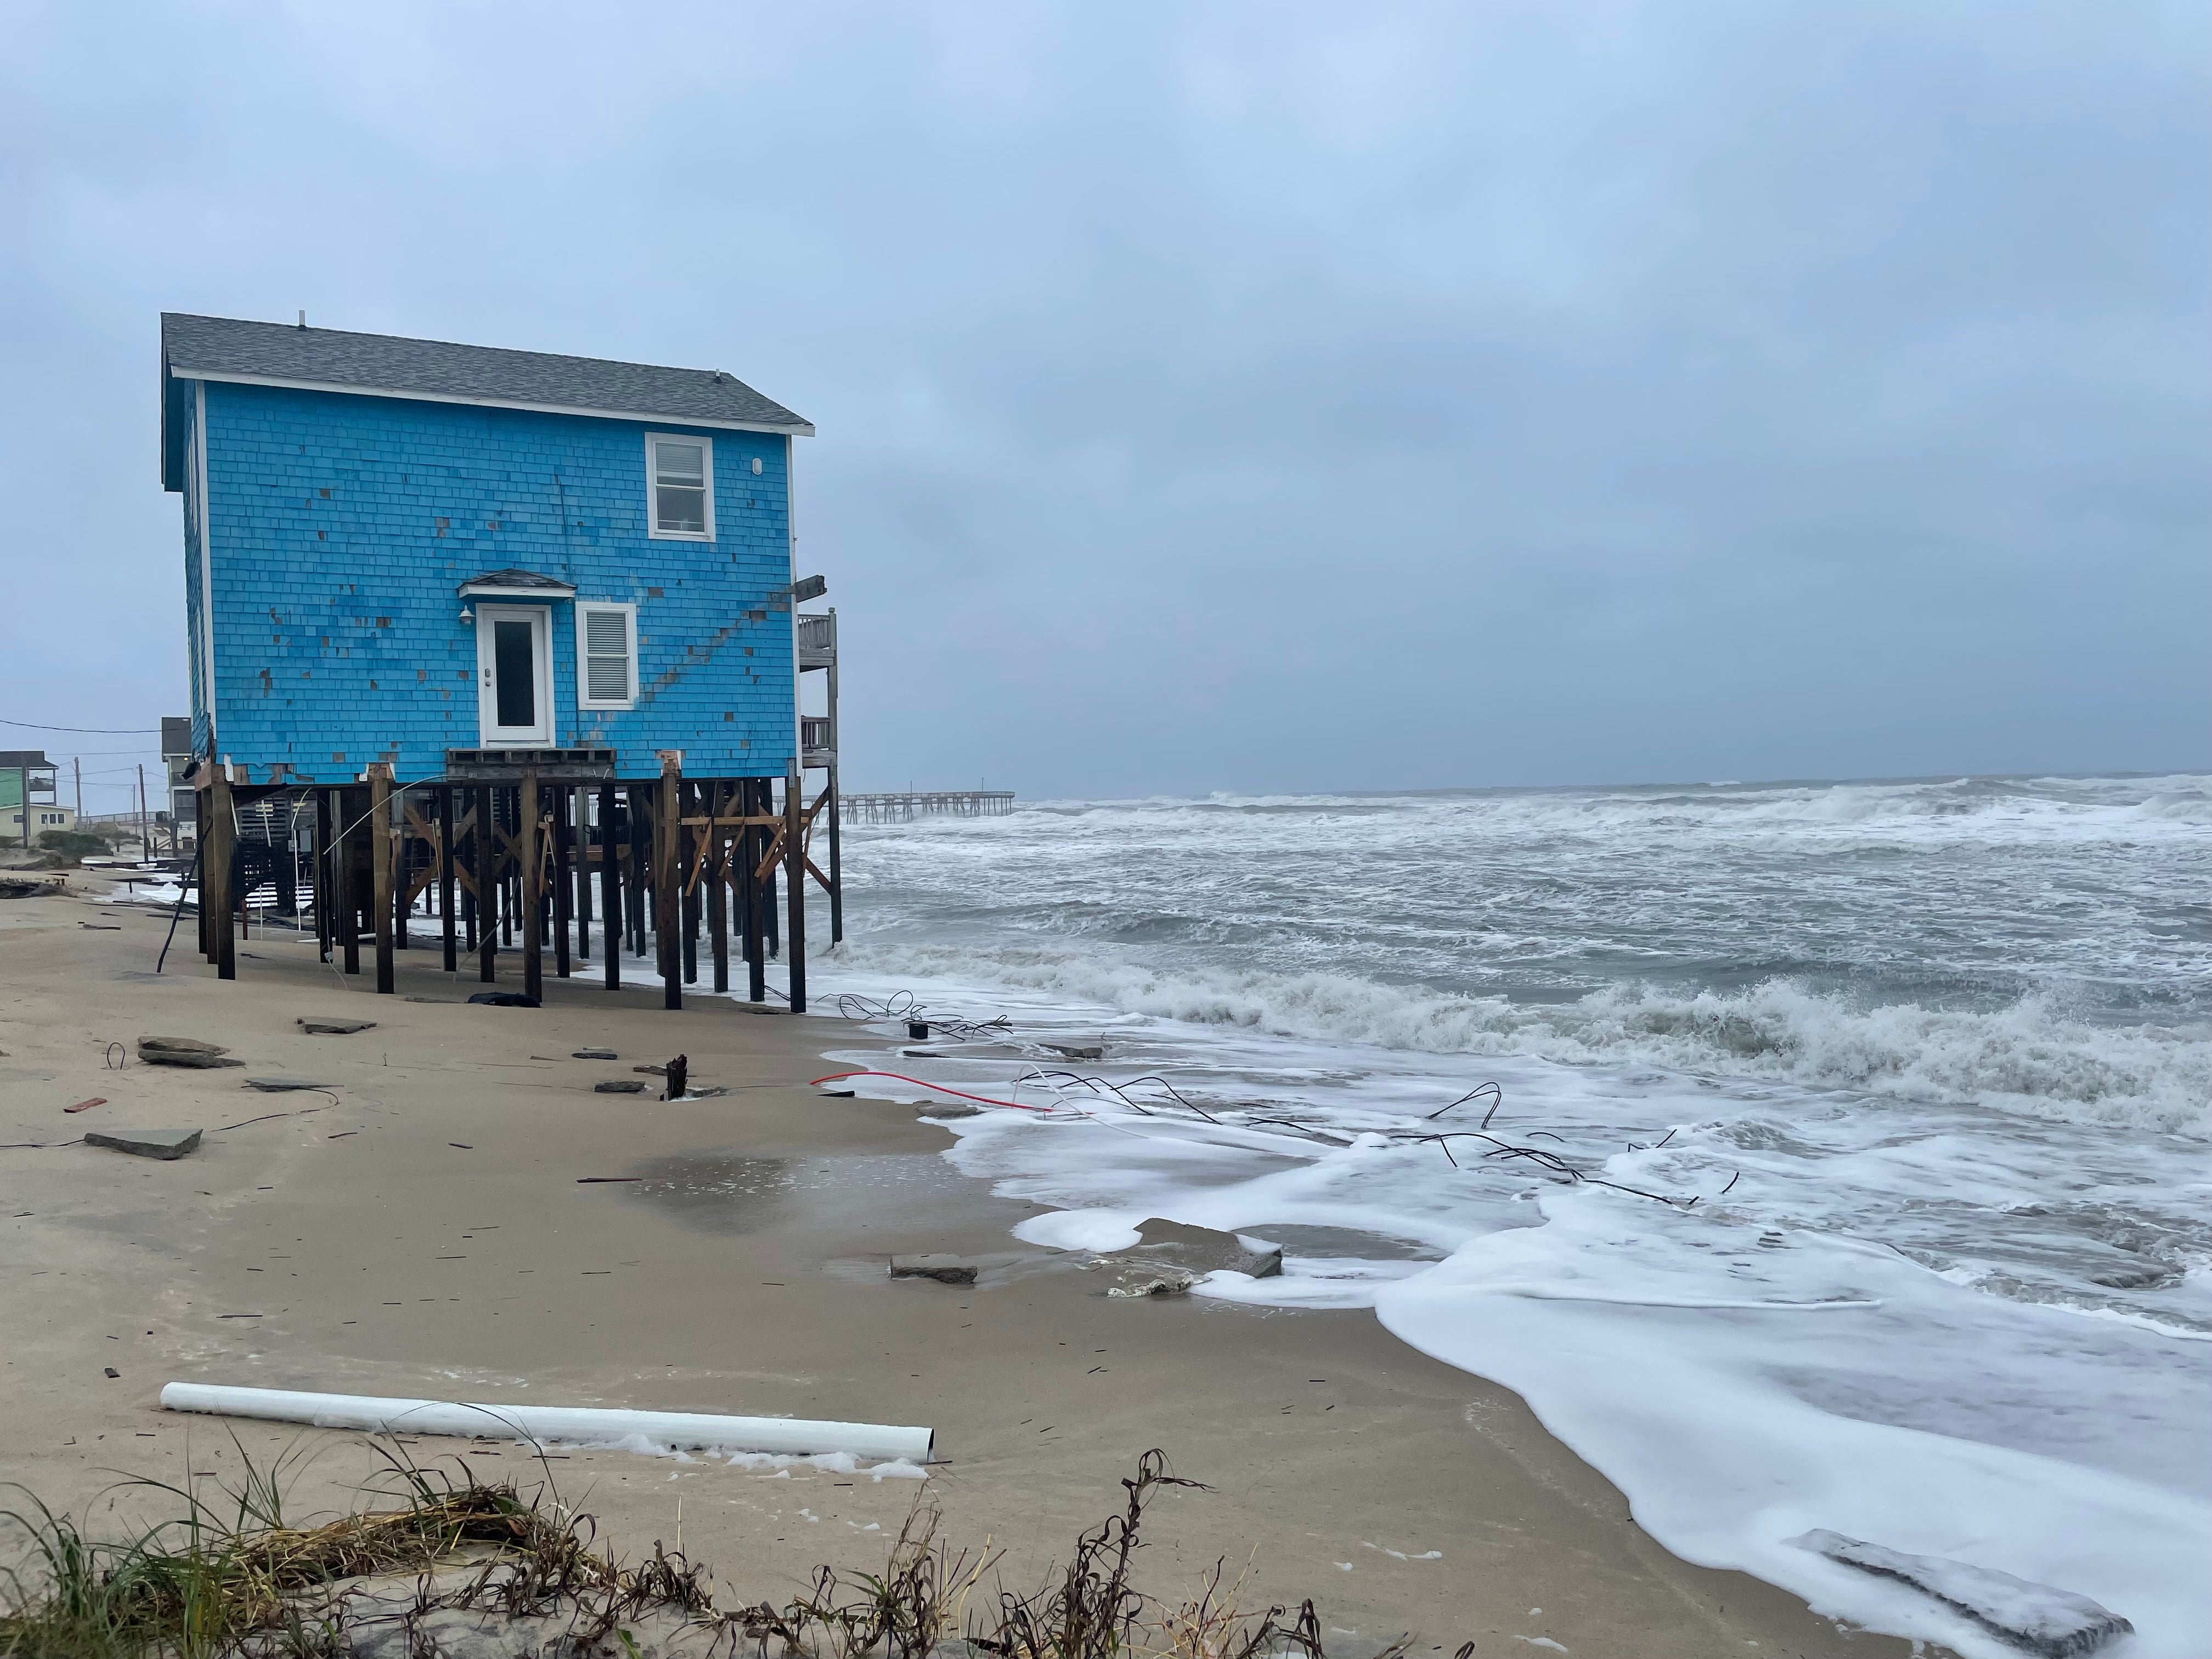 Other houses in the area are considered very vulnerable to collapse, and the National Park Service has notified the owners. (Photo: Cape Hatteras NPS / National Park Service, Fair Use)